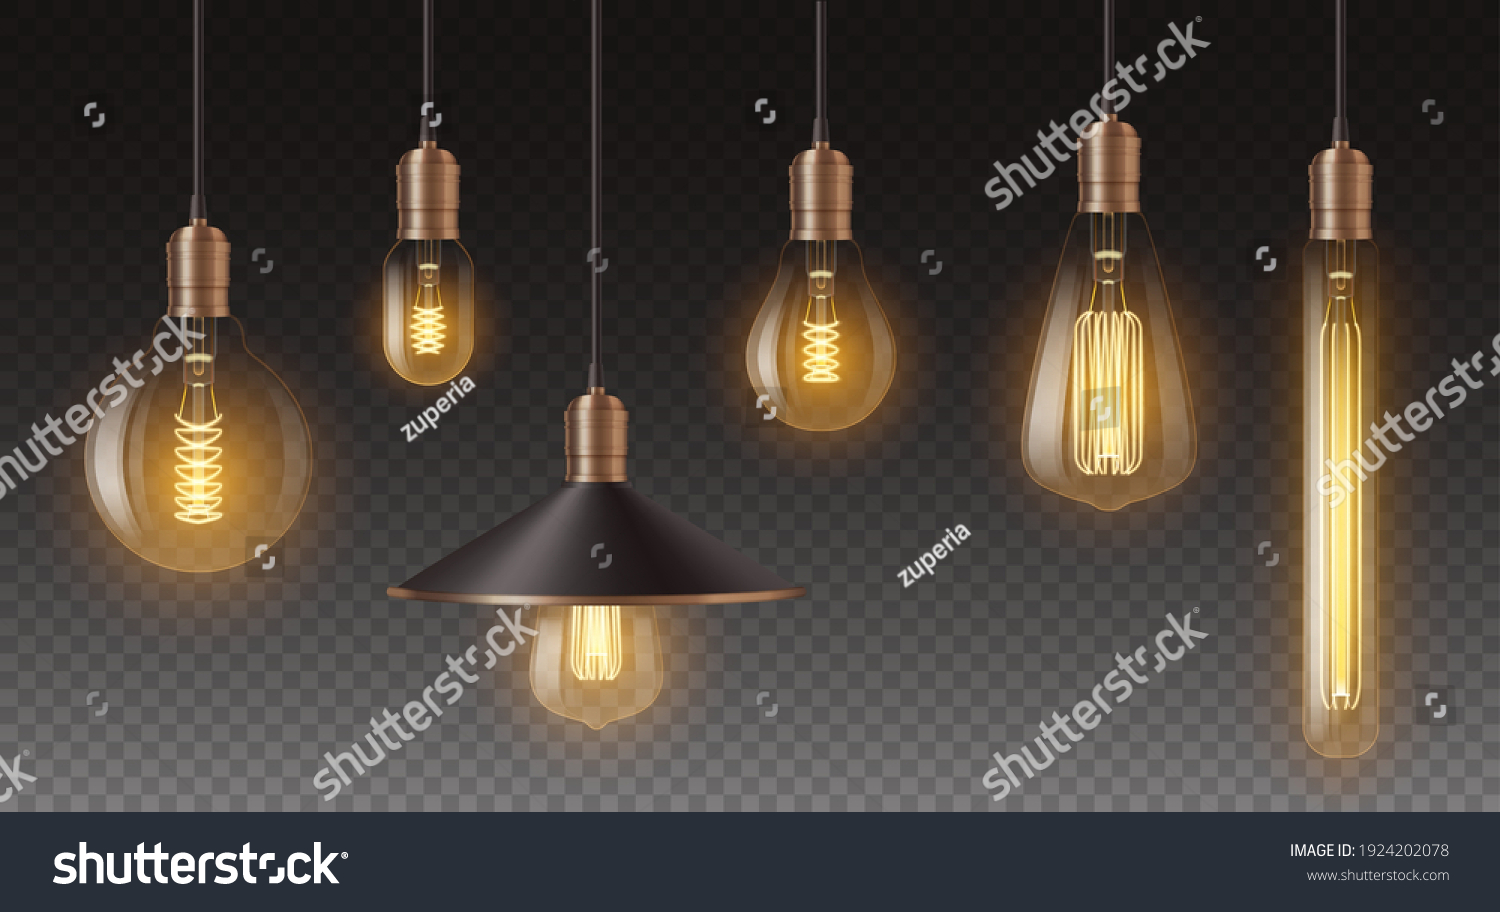 Realistic retro light bulbs set. Decorative vintage design edison lightbulbs of different shapes. Lamps in antique style with copper. 3d vector illustration #1924202078